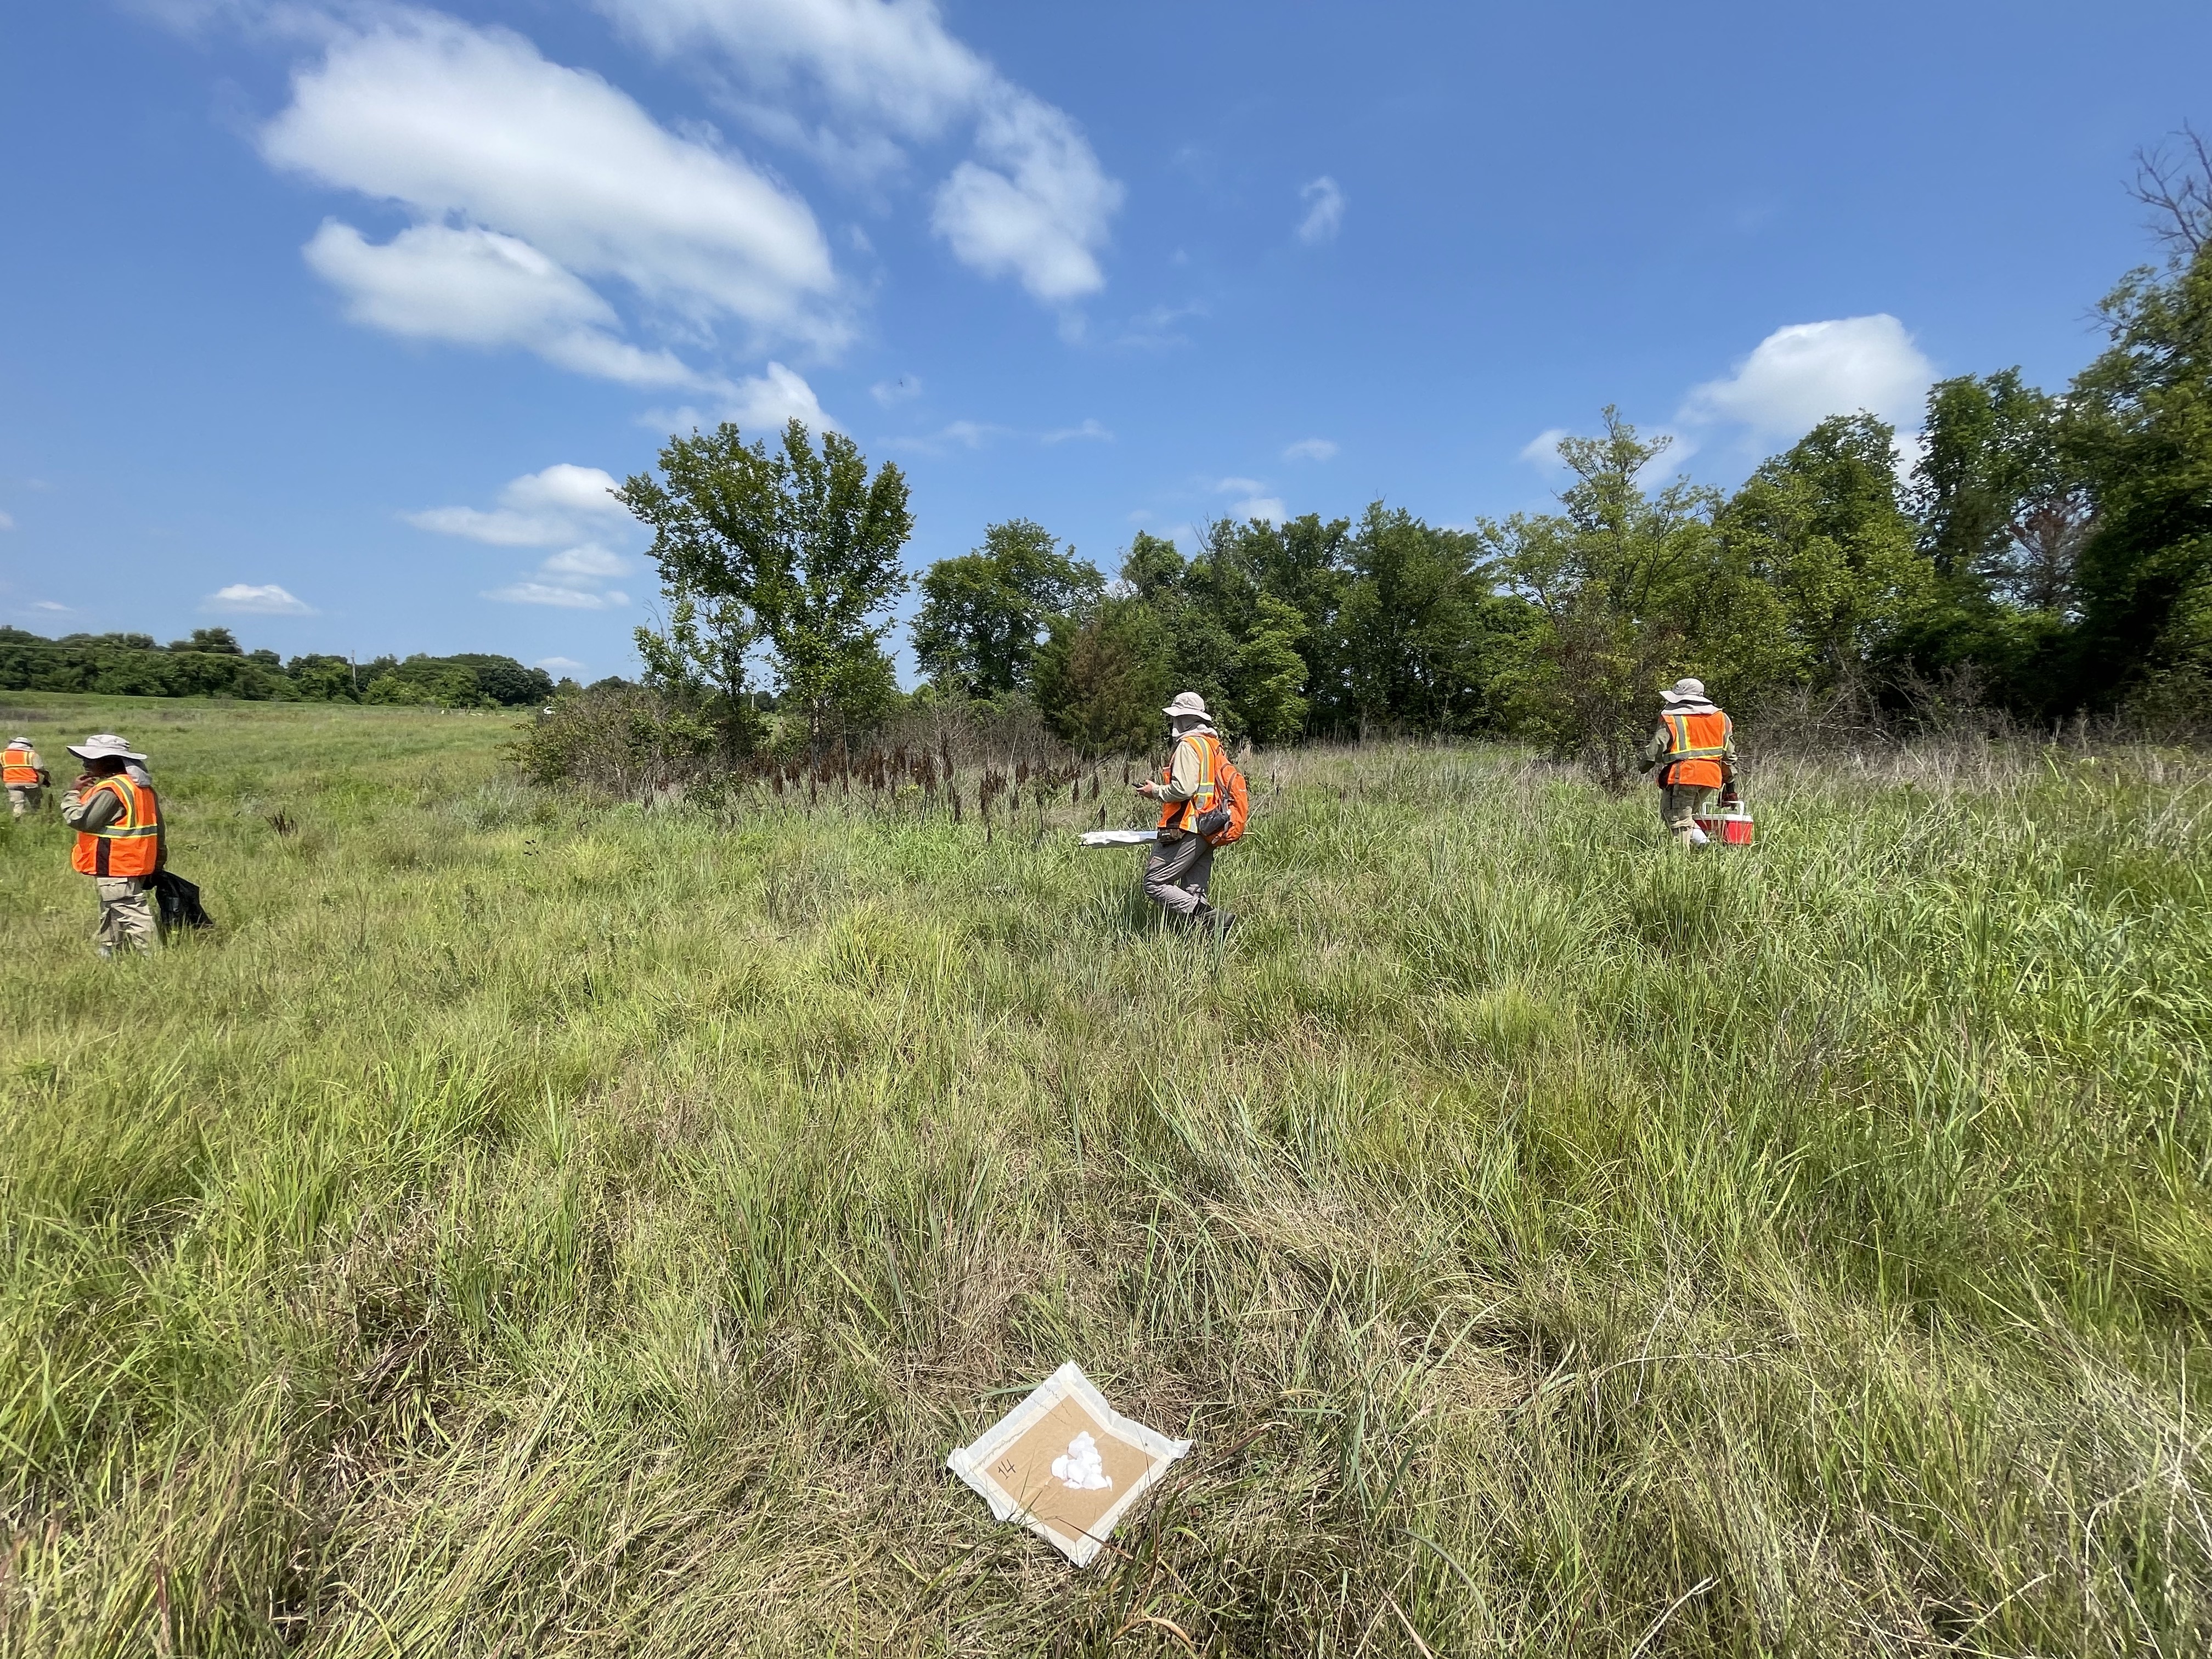 A team of KU biologists collets ticks at Clinton Lake, one of five sites it samples across Kansas. (Photo by Jarrett Mellenbruch)